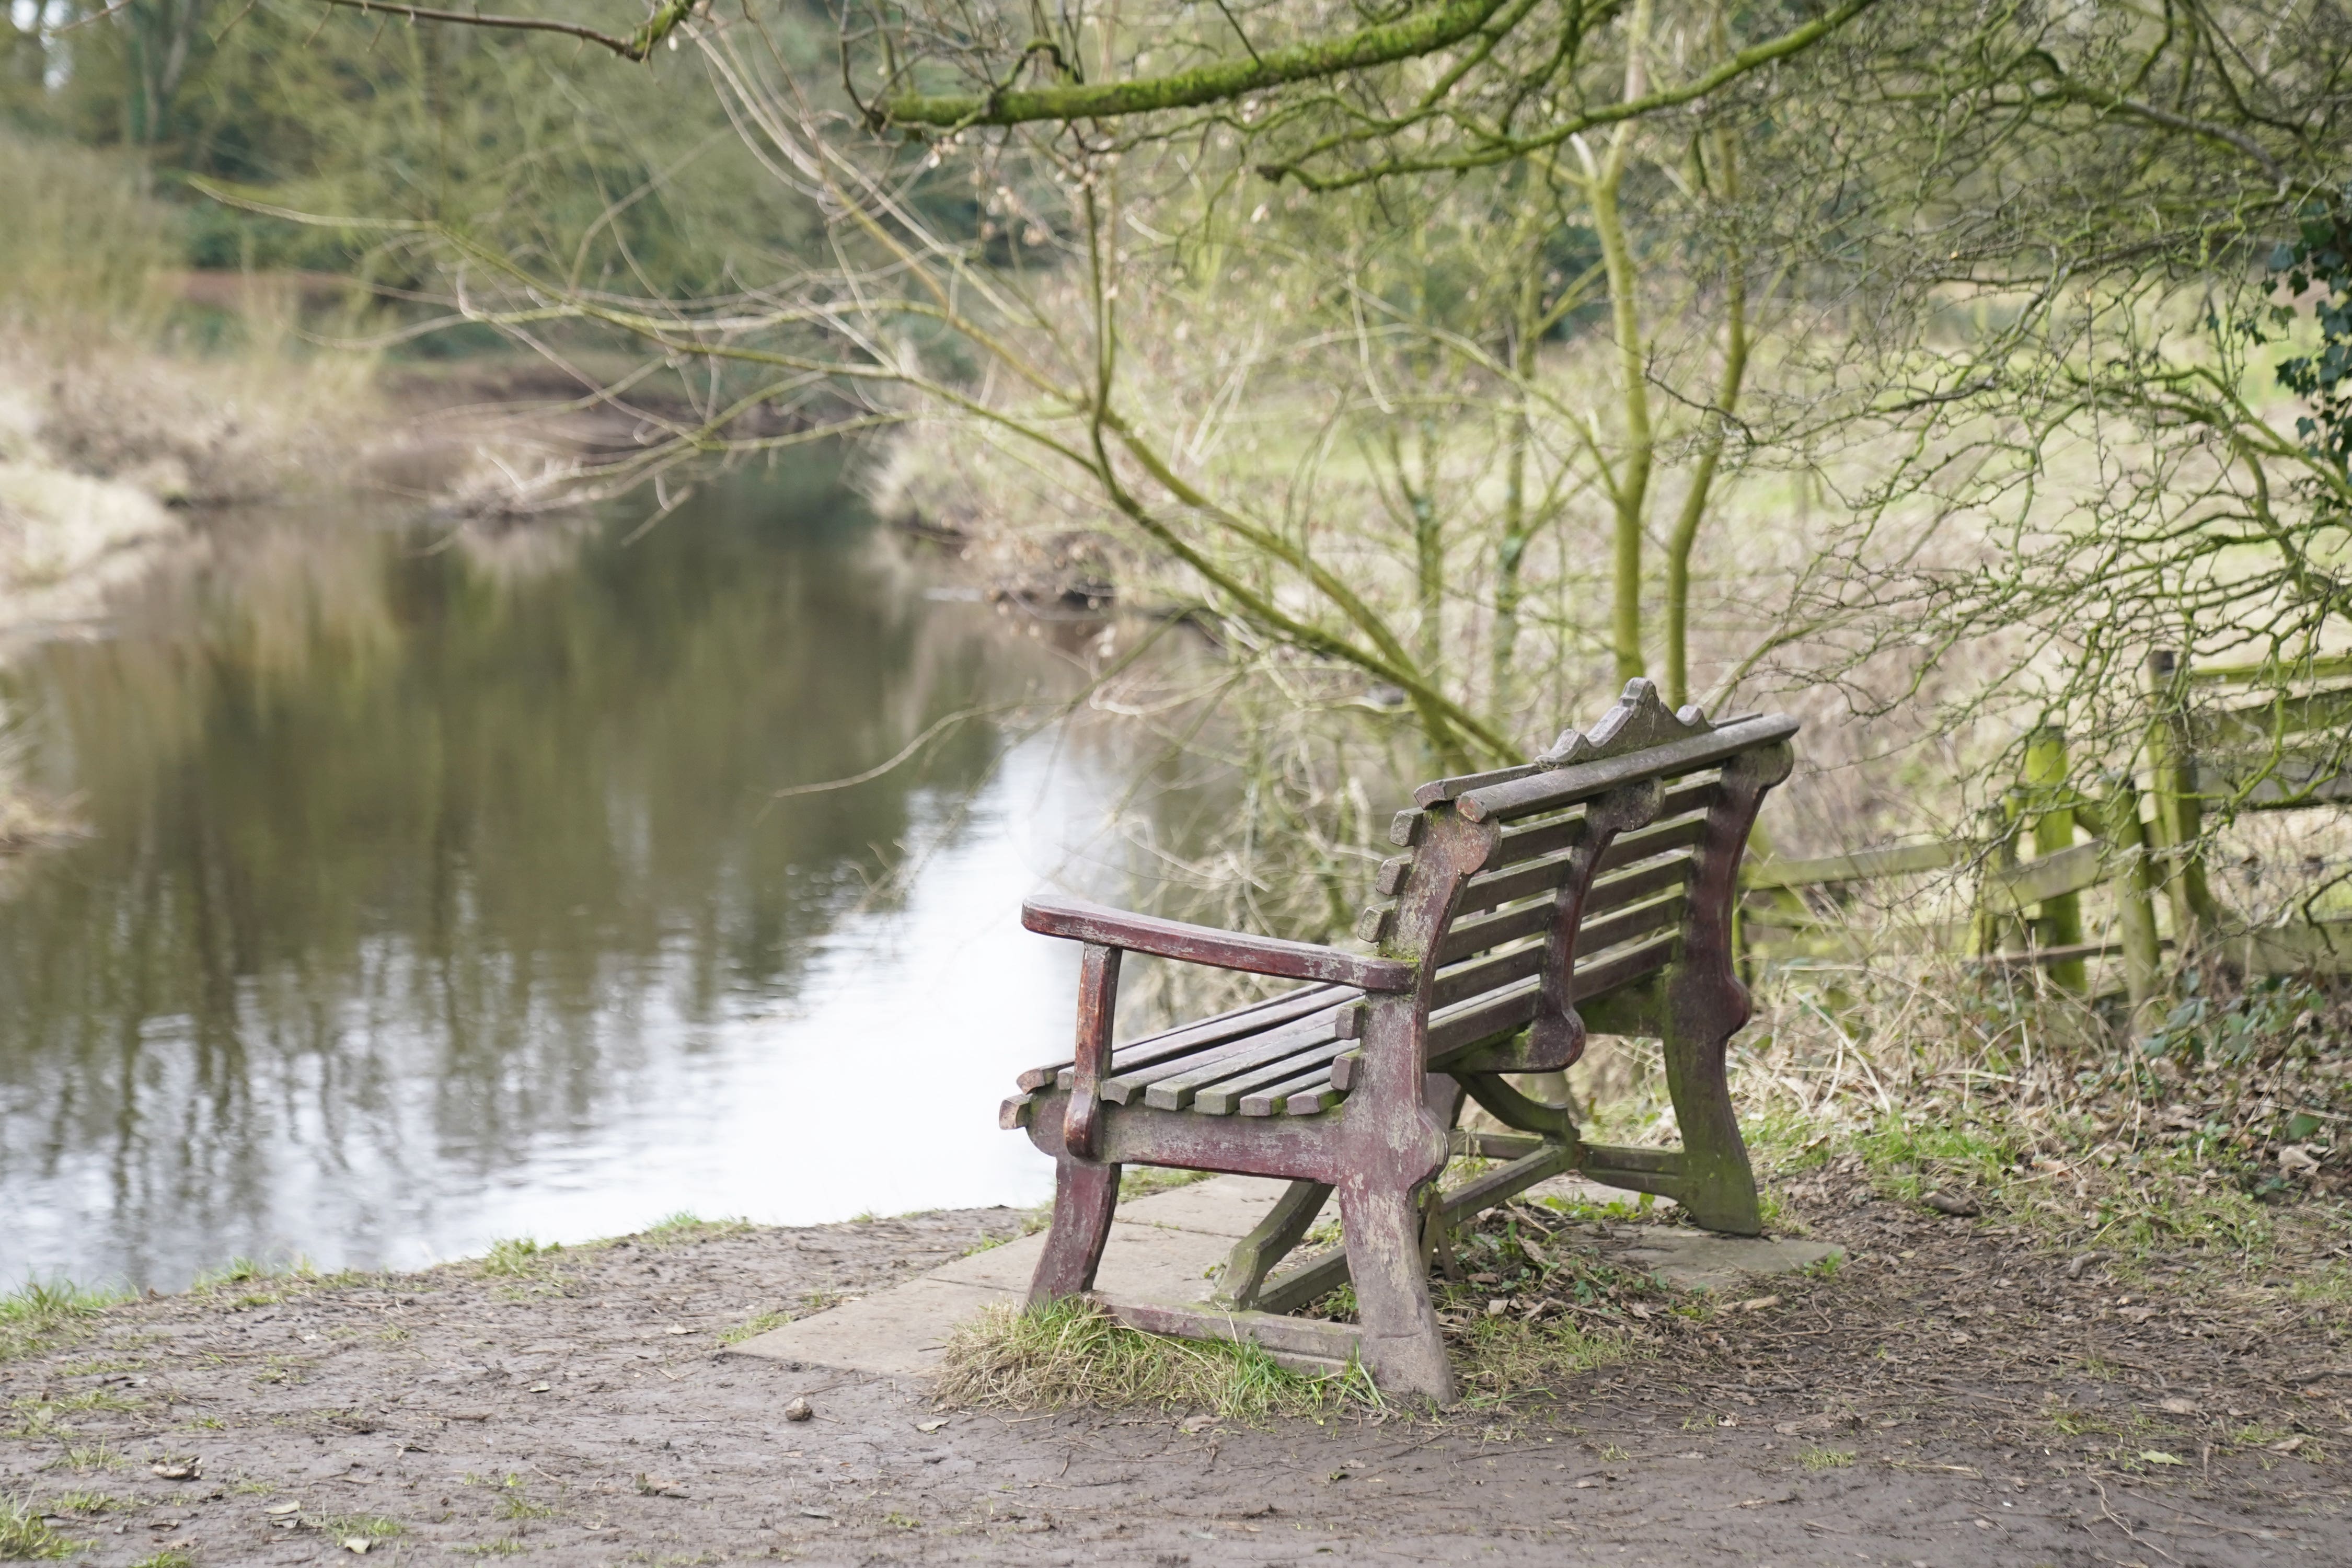 Ms Bulley’s phone was found on a bench by the banks of the River Wyre